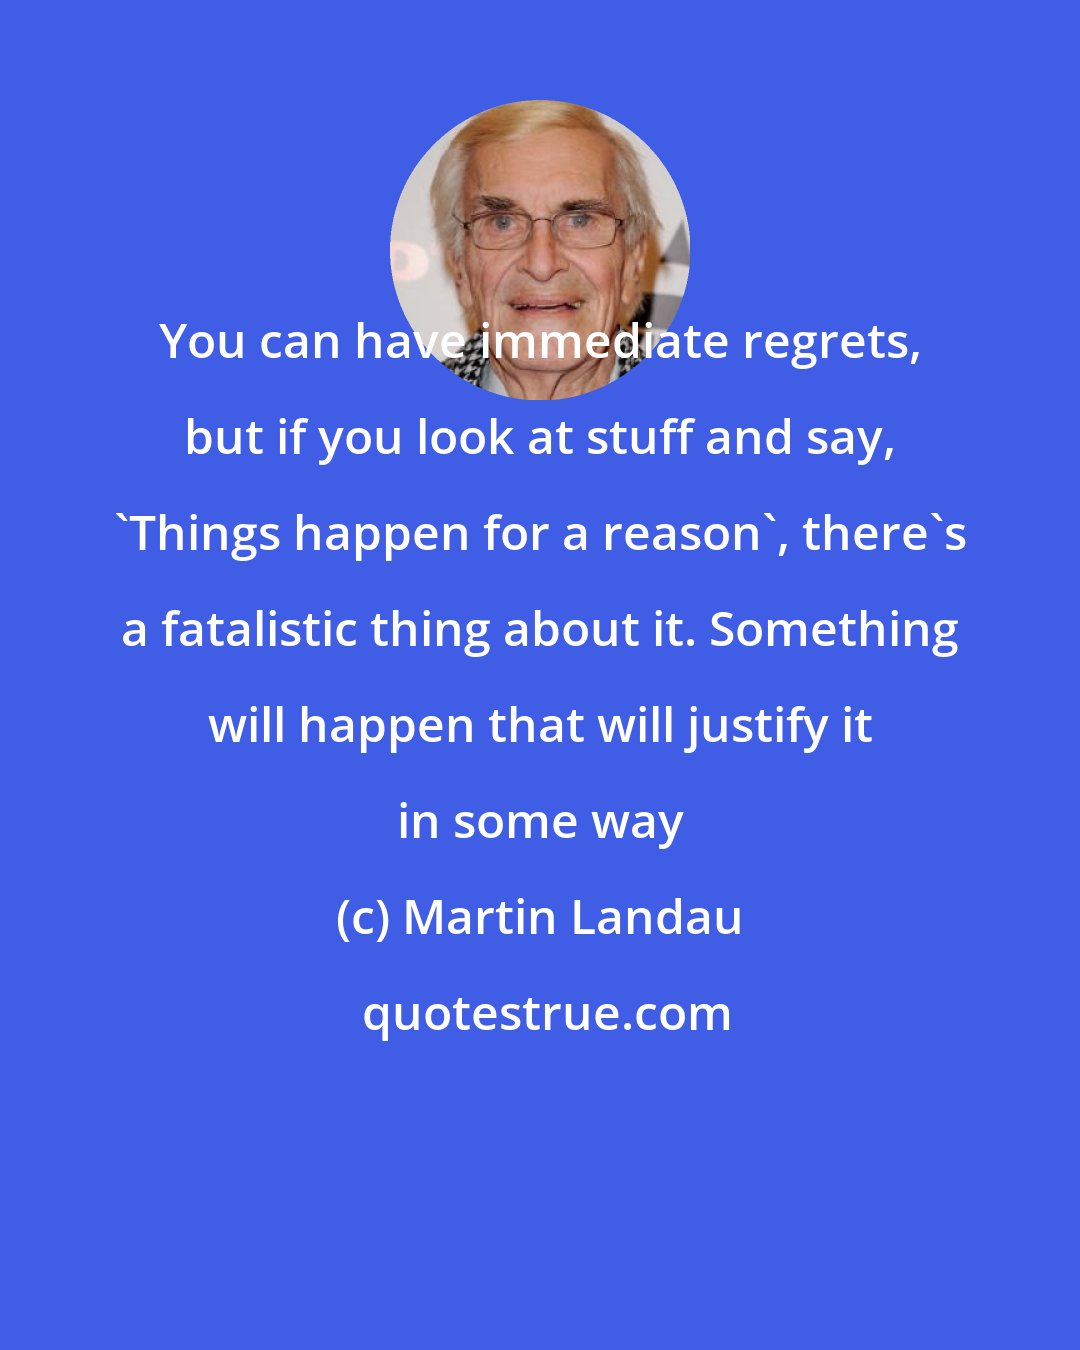 Martin Landau: You can have immediate regrets, but if you look at stuff and say, 'Things happen for a reason', there's a fatalistic thing about it. Something will happen that will justify it in some way